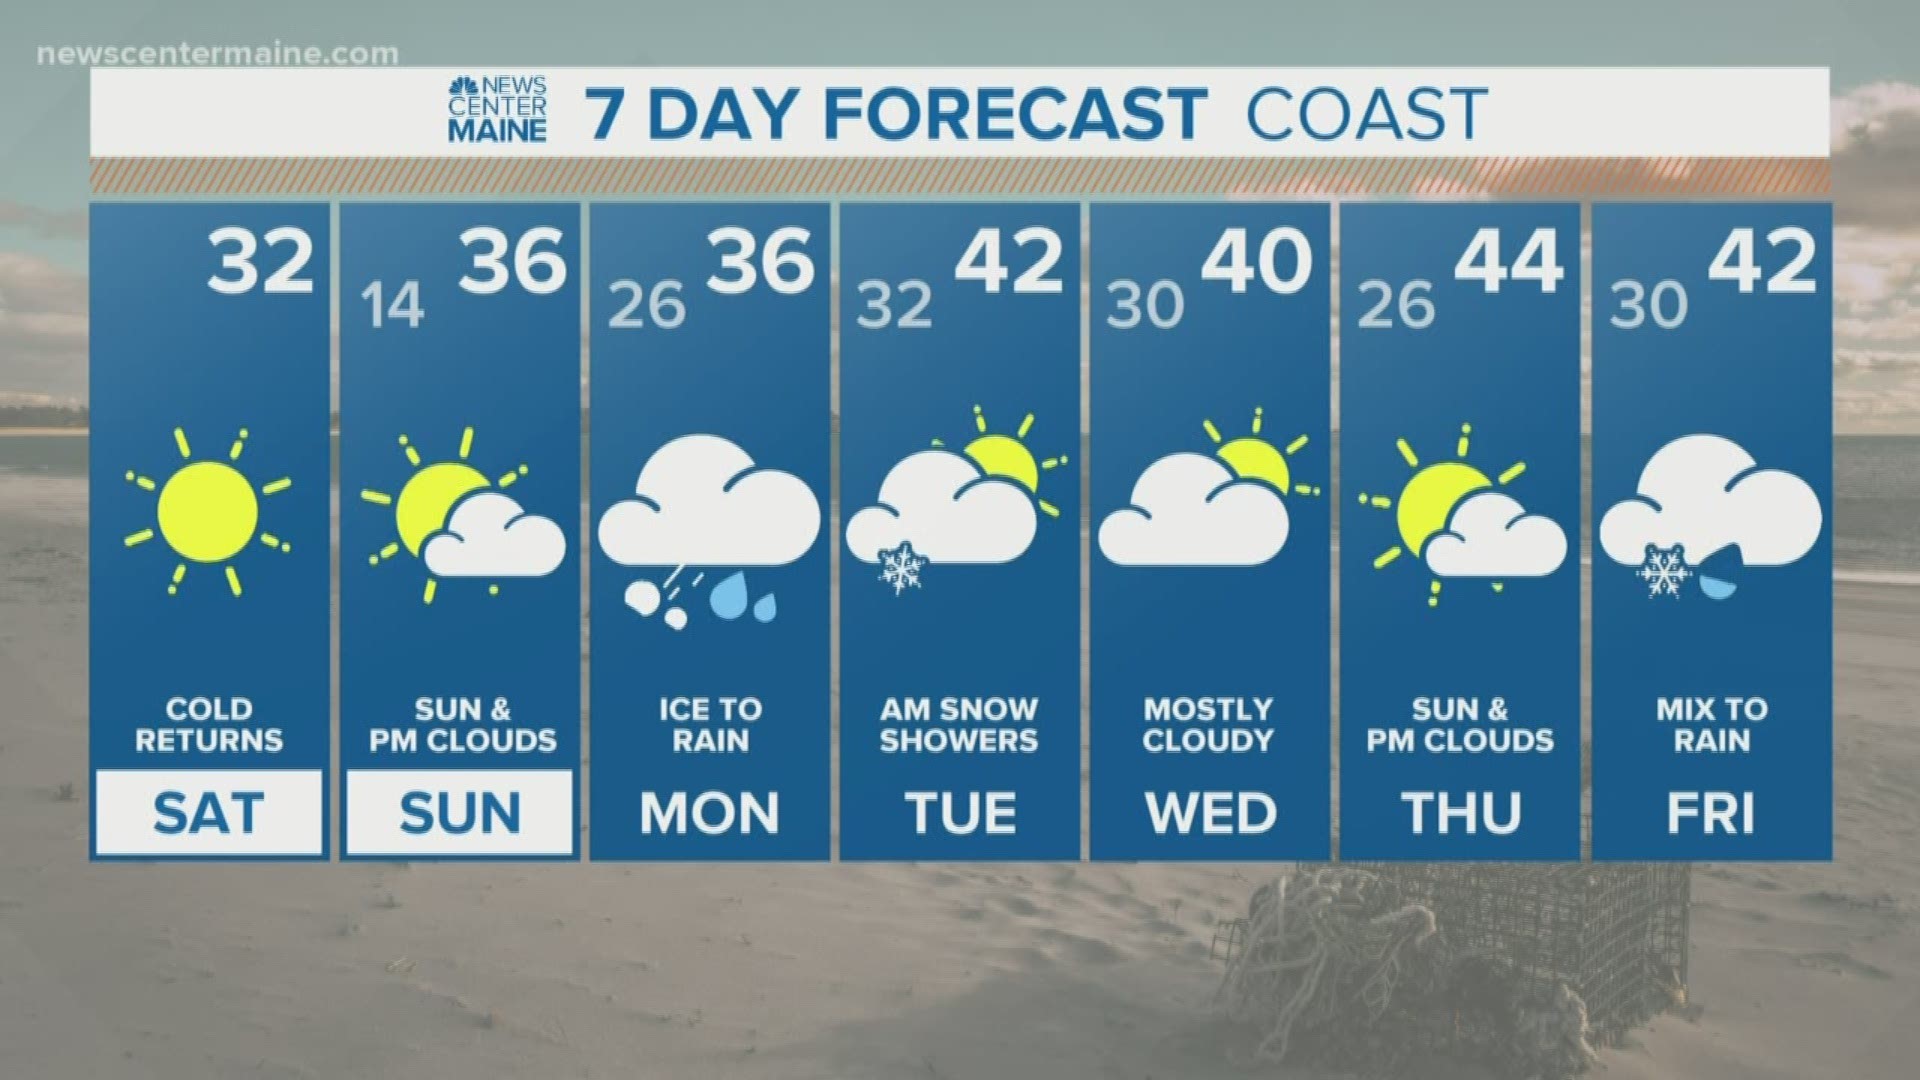 NEWS CENTER Maine weather video forecast. Updated on 11-16-19 at 7:20 am.